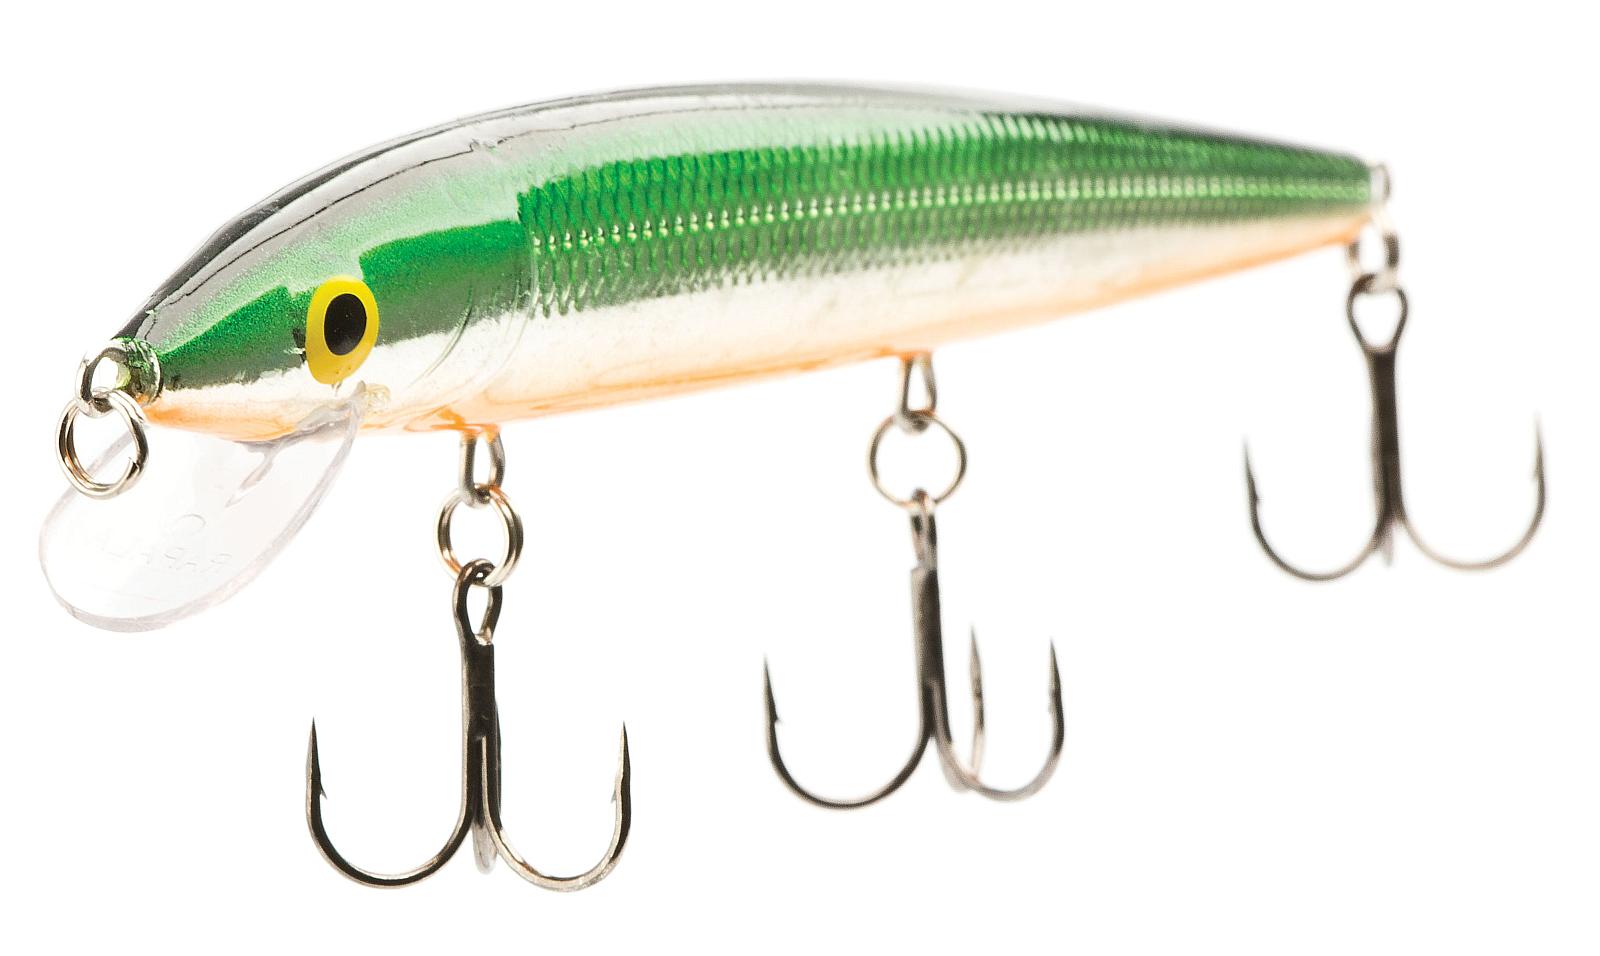 Topwater Diver Lure? This Thing Is Sick!